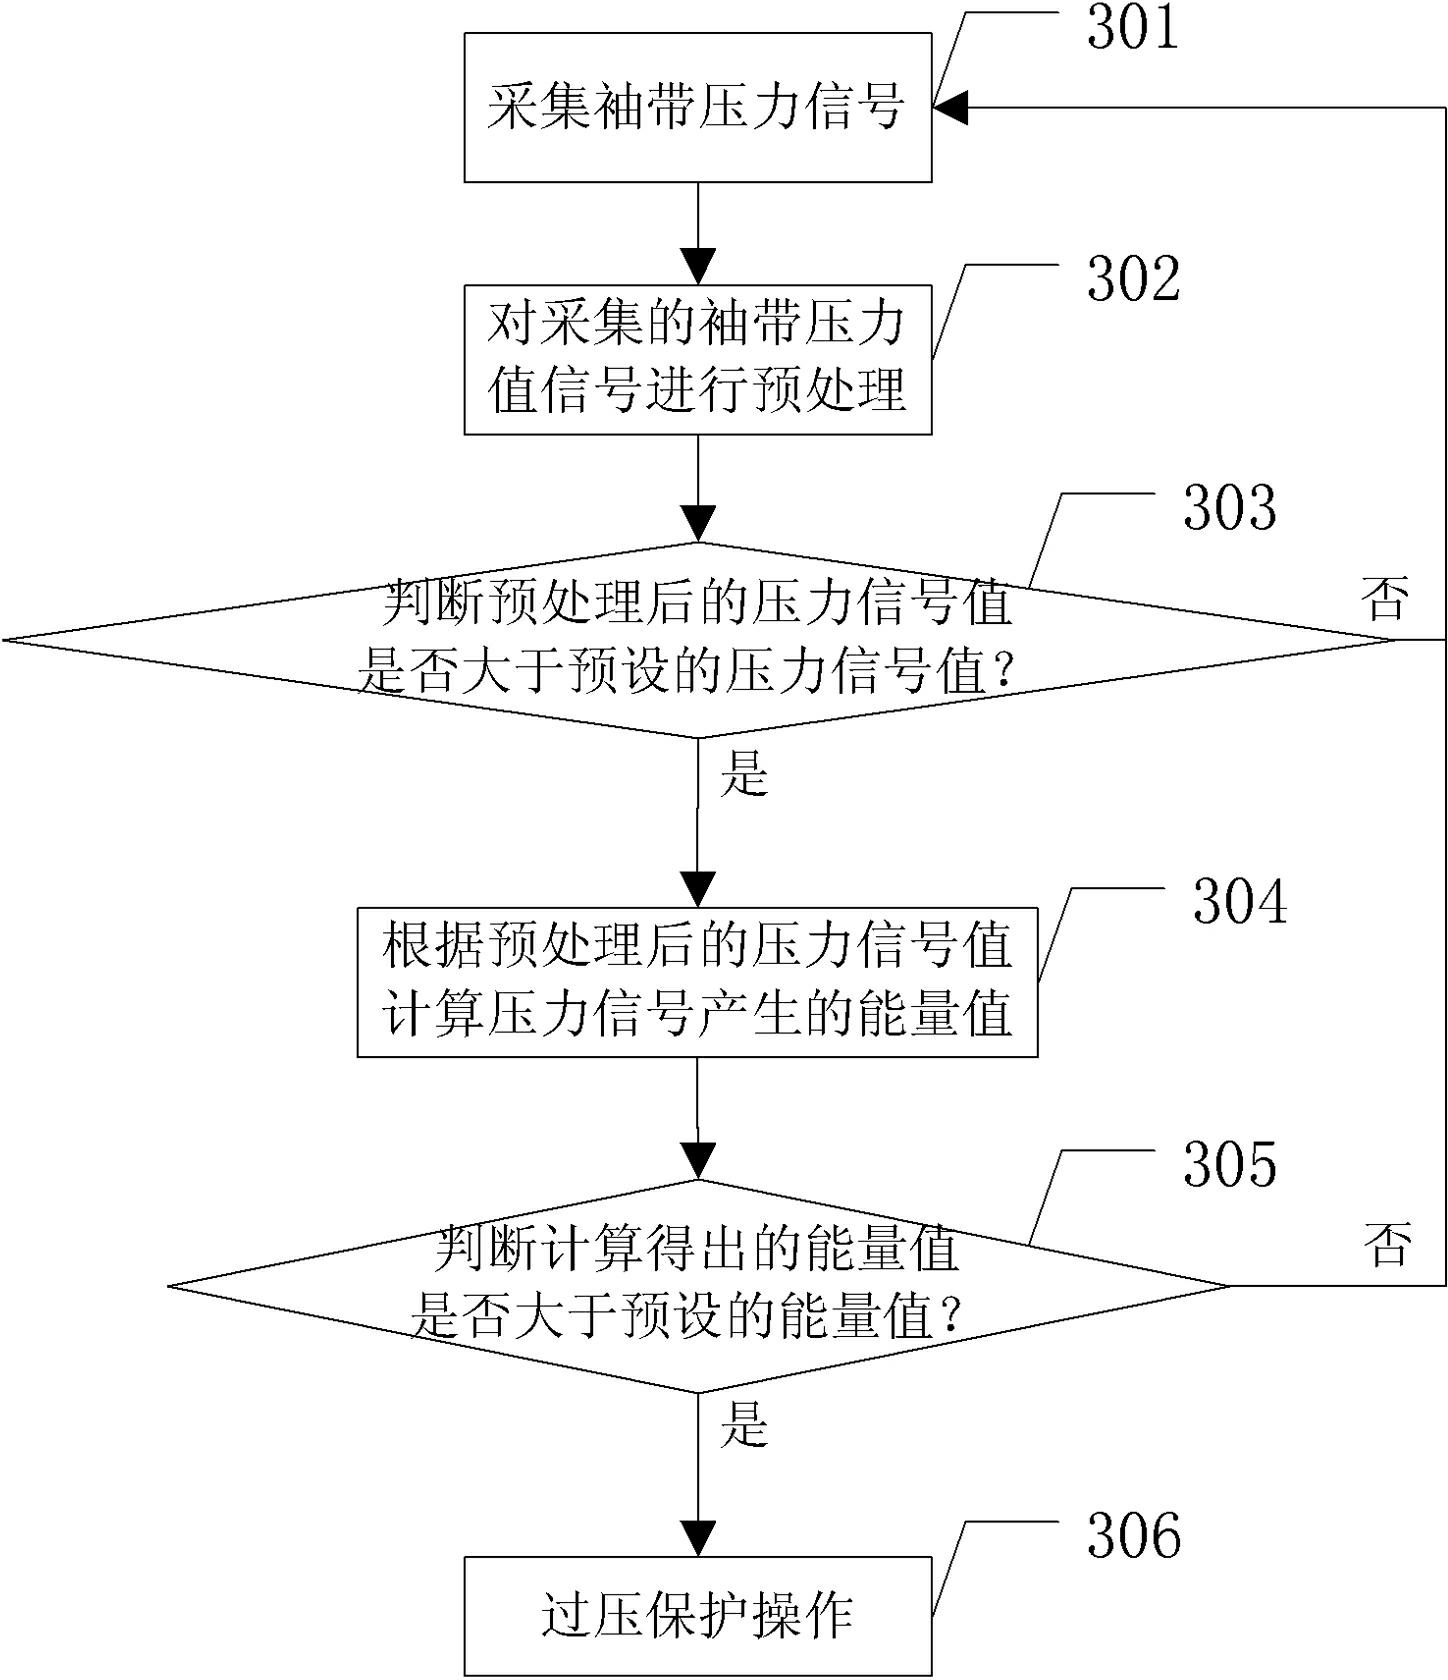 Pressure protection method and pressure protection apparatus used in non-invasive blood pressure measurement process